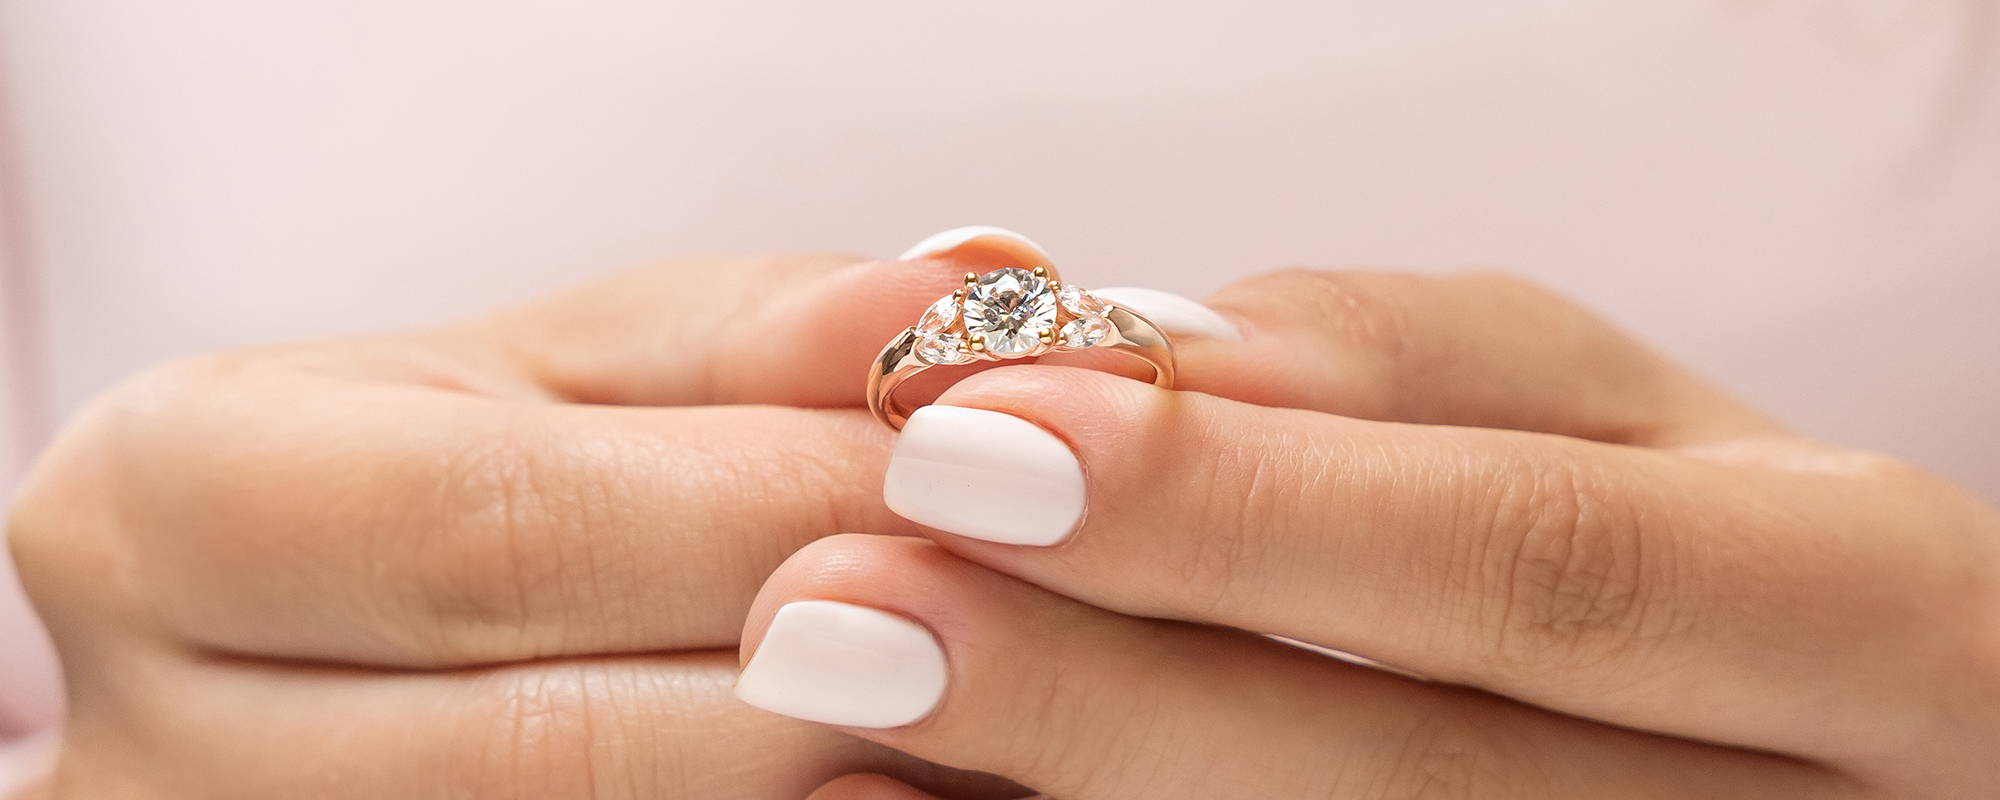 These 10 Beautiful Engagement Rings Are Perfect For The Alternative Bride |  IMAGE.ie